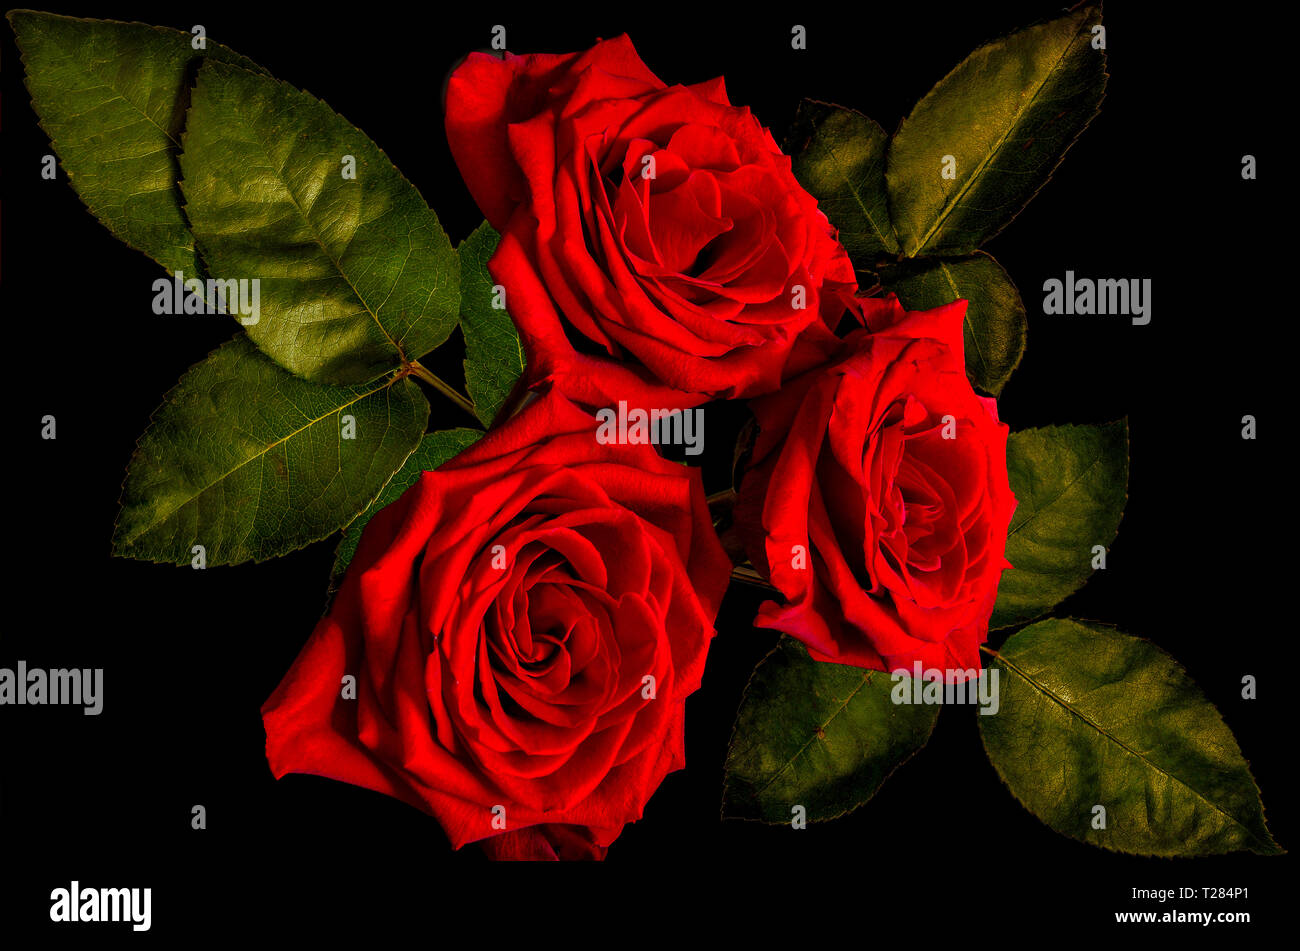 Vintage floral background with three dark-red roses bouquet and green leaves close up, on black backdrop isolated. Concept of love, passion or sad. Br Stock Photo